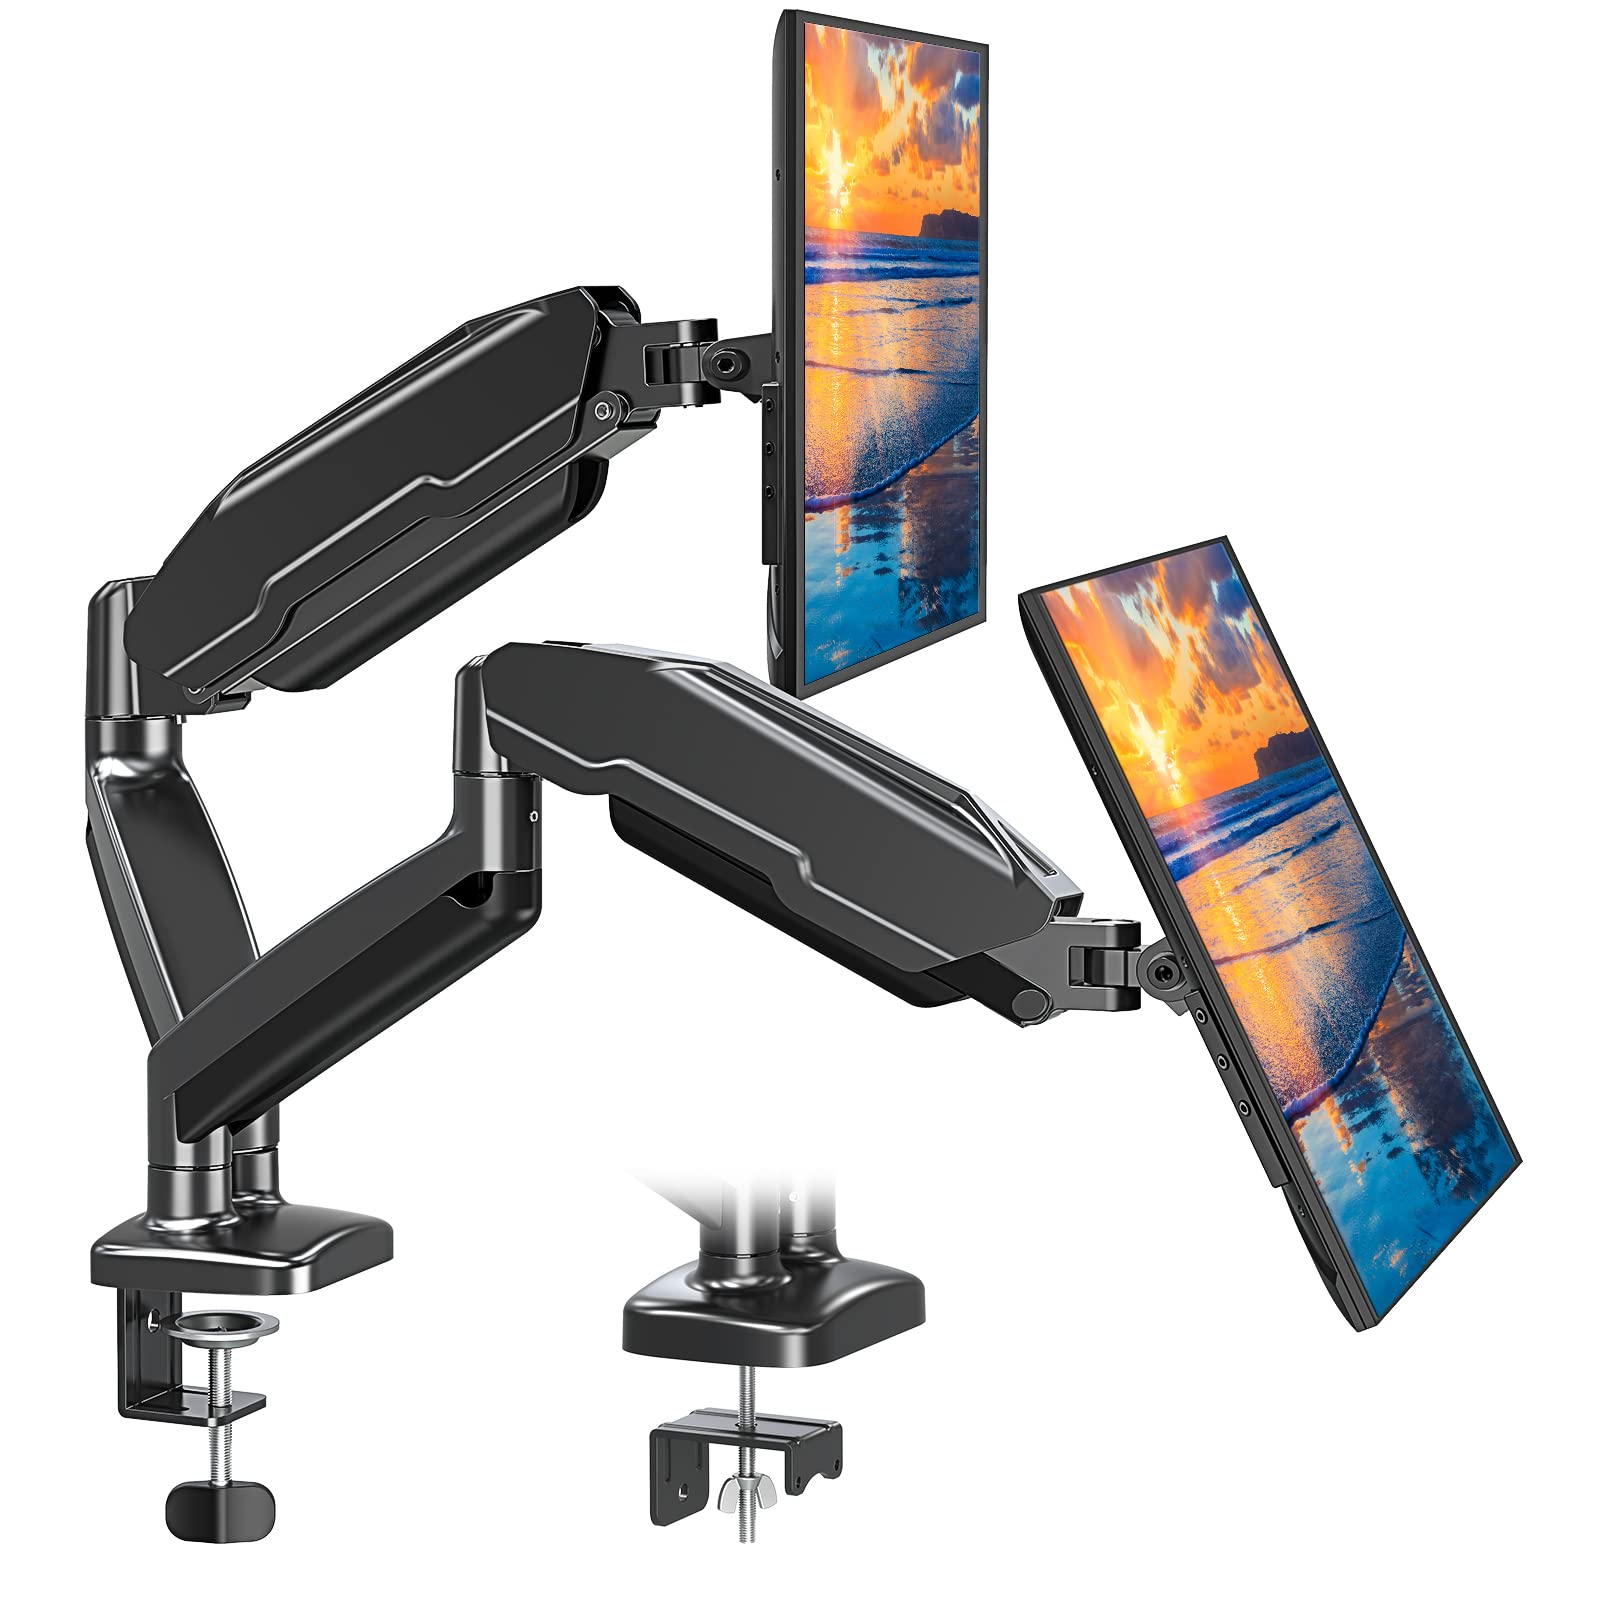 Amazon Select Accounts (YMMV): Mount Pro Dual Monitor Adjustable Spring Stand Mounts (for 13-32" Monitors) $32 + Free Shipping